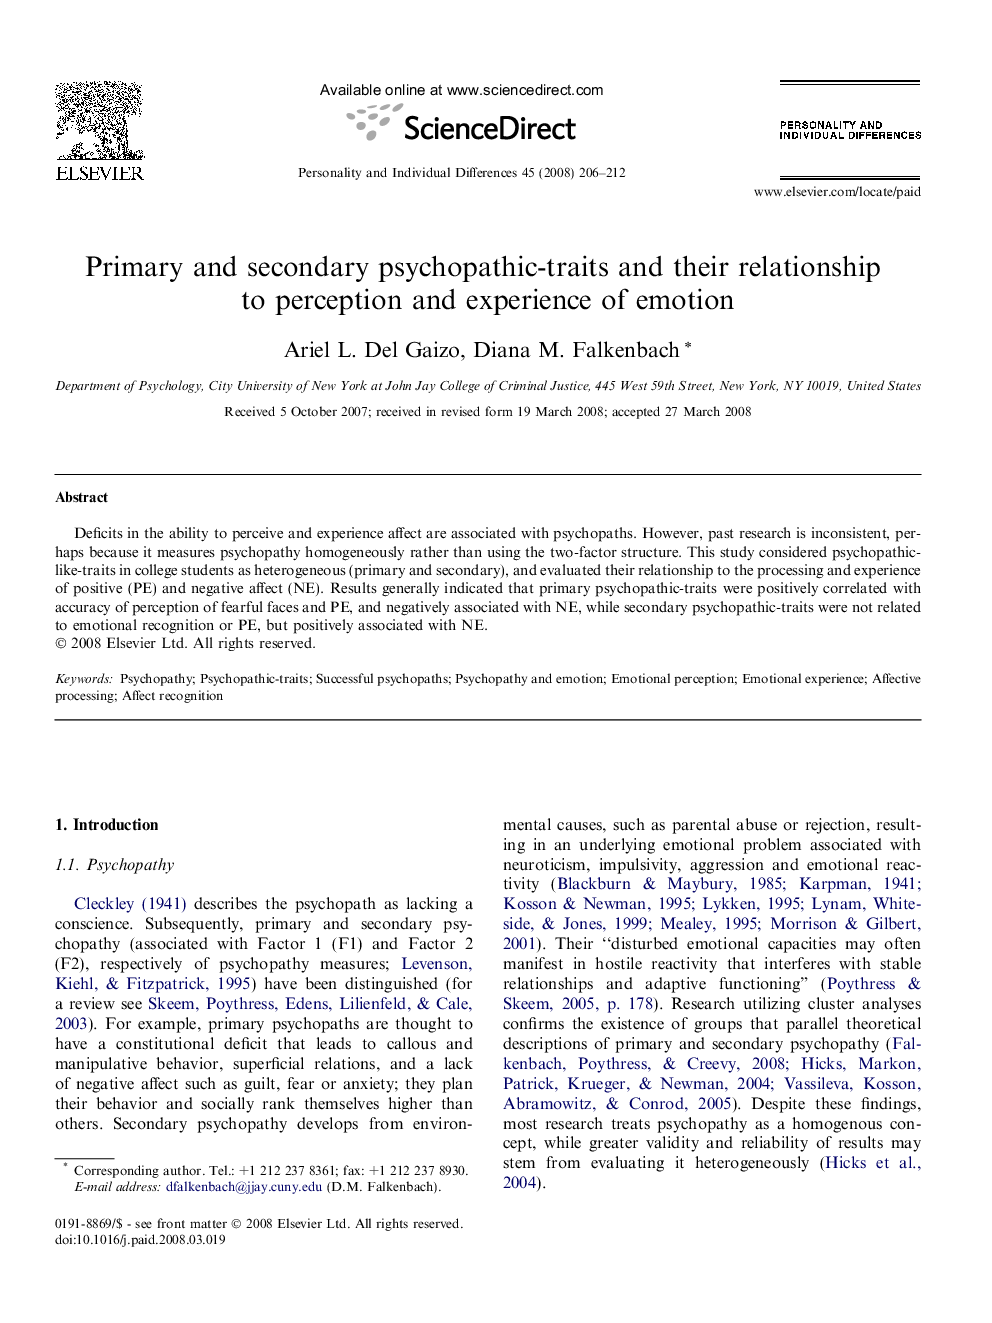 Primary and secondary psychopathic-traits and their relationship to perception and experience of emotion